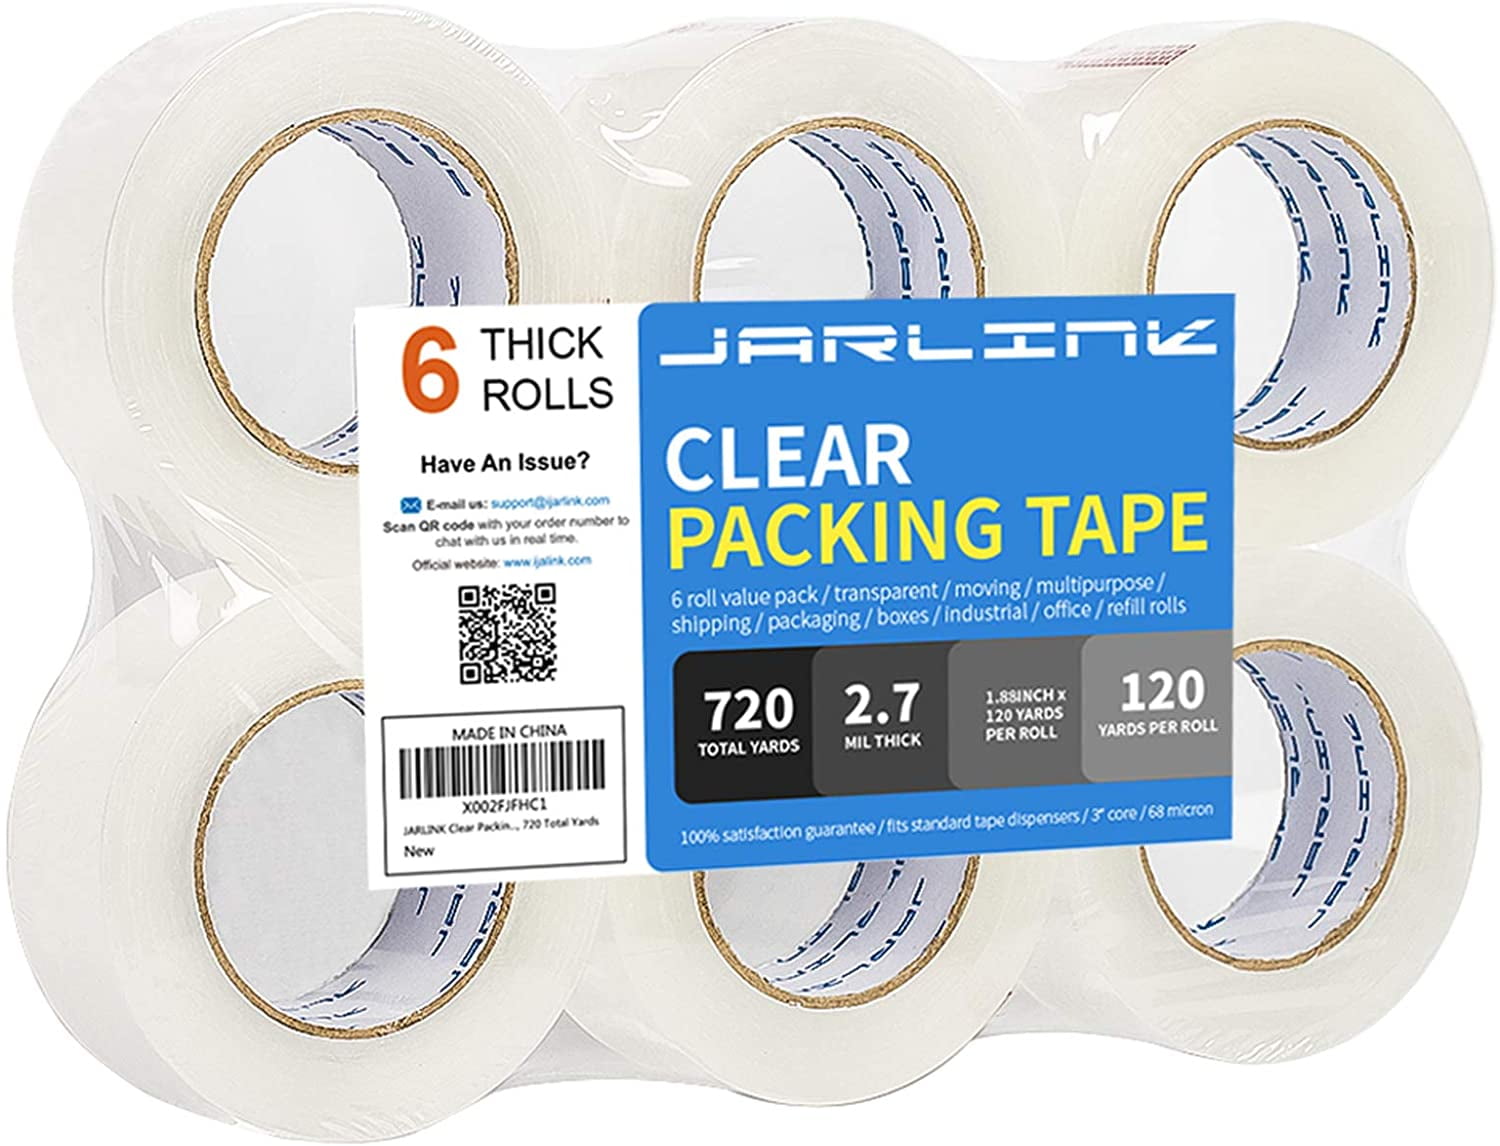 Clear Packing Tape 12 Rolls Office Packaging Shipping Heavy Duty Packing Tape Refill ,1.88 x 60 yd Designed for Moving Boxes Total 720